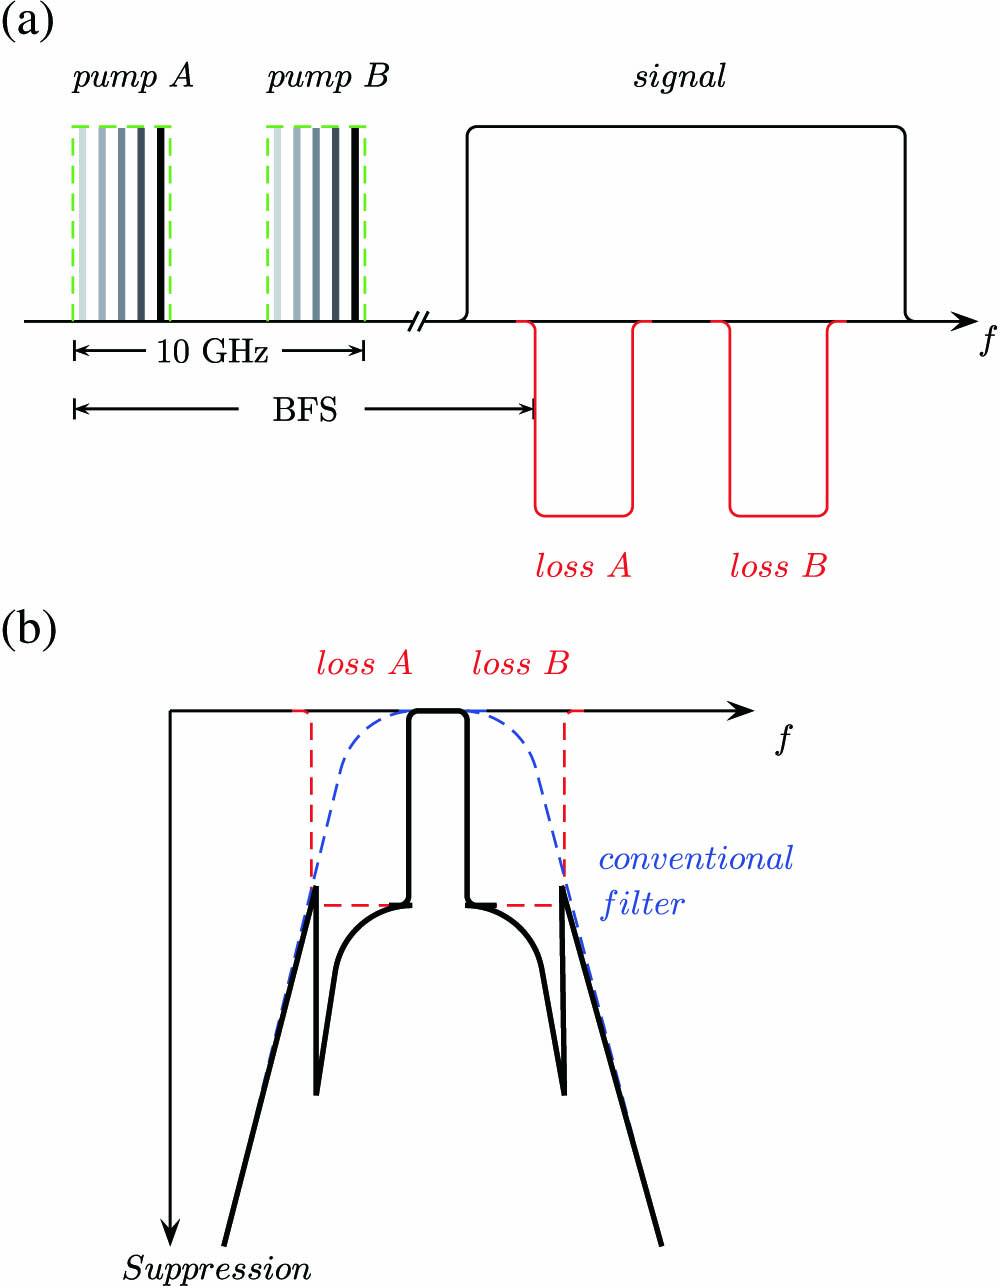 (a) Principle of the proposed filter based on SBS losses. Black solid line, broad input signal; BFS, Brillouin frequency shift. (b) Overall filter profile of SBS loss-based filter with a conventional optical filter. Blue dashed line, filter profile of conventional filter; red dashed line, SBS losses; black solid line, overall filter profile.